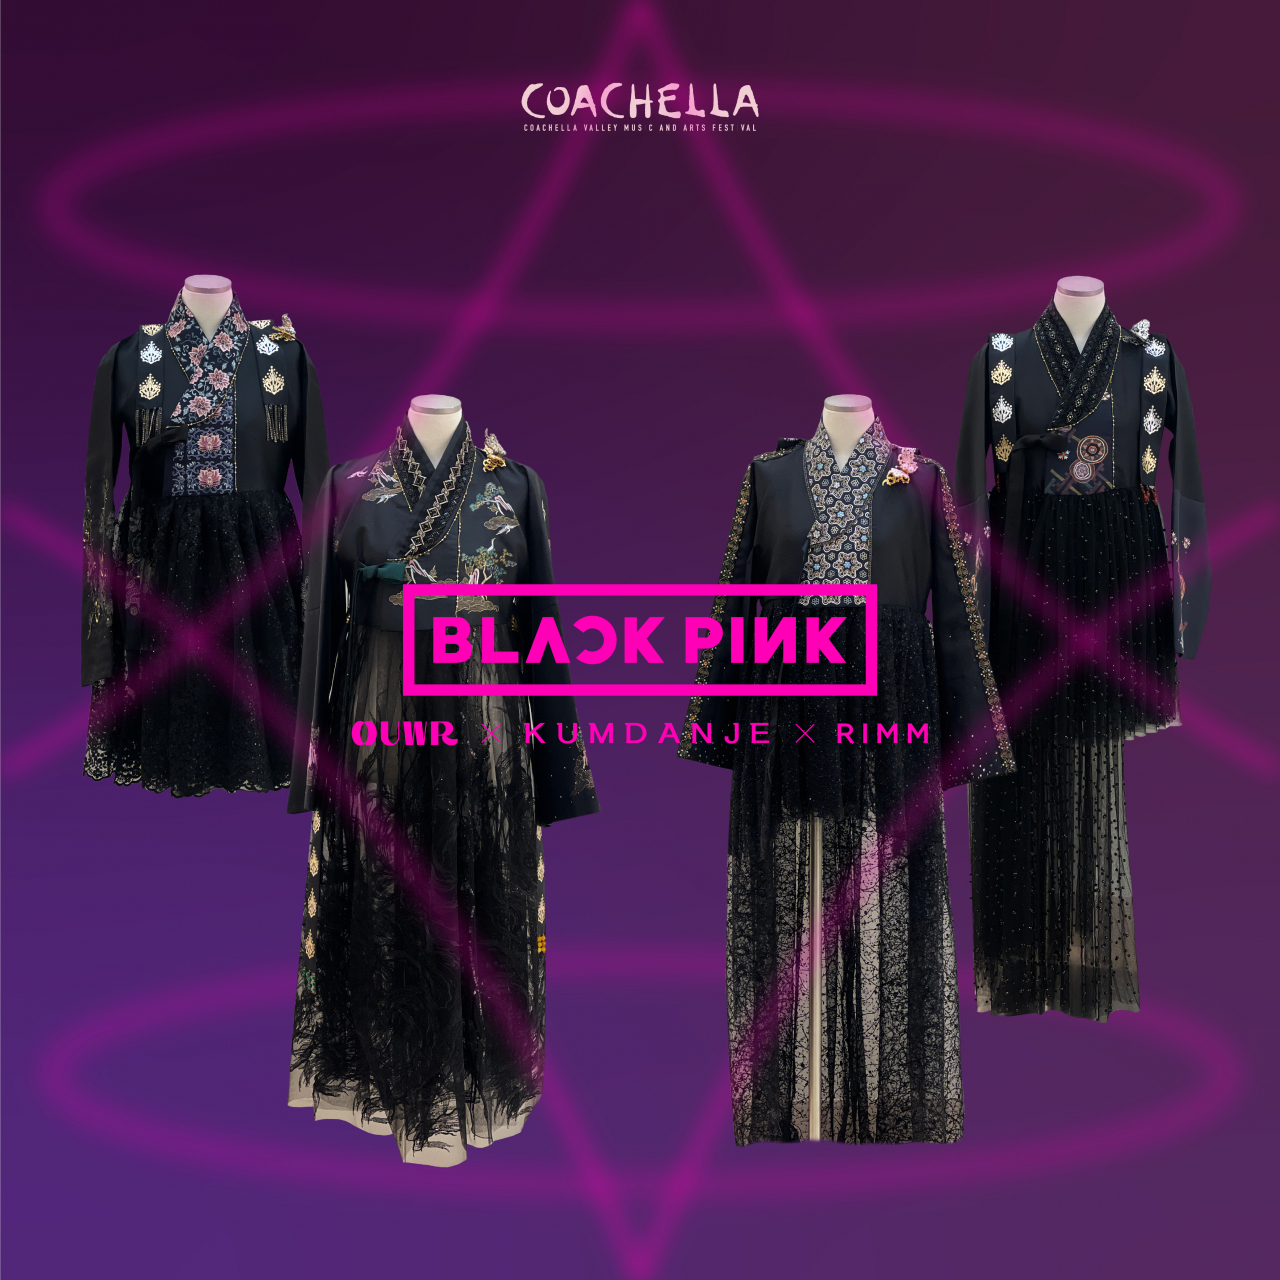 These hanbok outfits designed by Kumdanje and OUWR, decorated with Rimm's butterfly brooch on the shoulders, were worn by Blackpink at the Coachella Valley Music and Arts Festival Indio, California, on Saturday. (Kumdanje/OUWR)